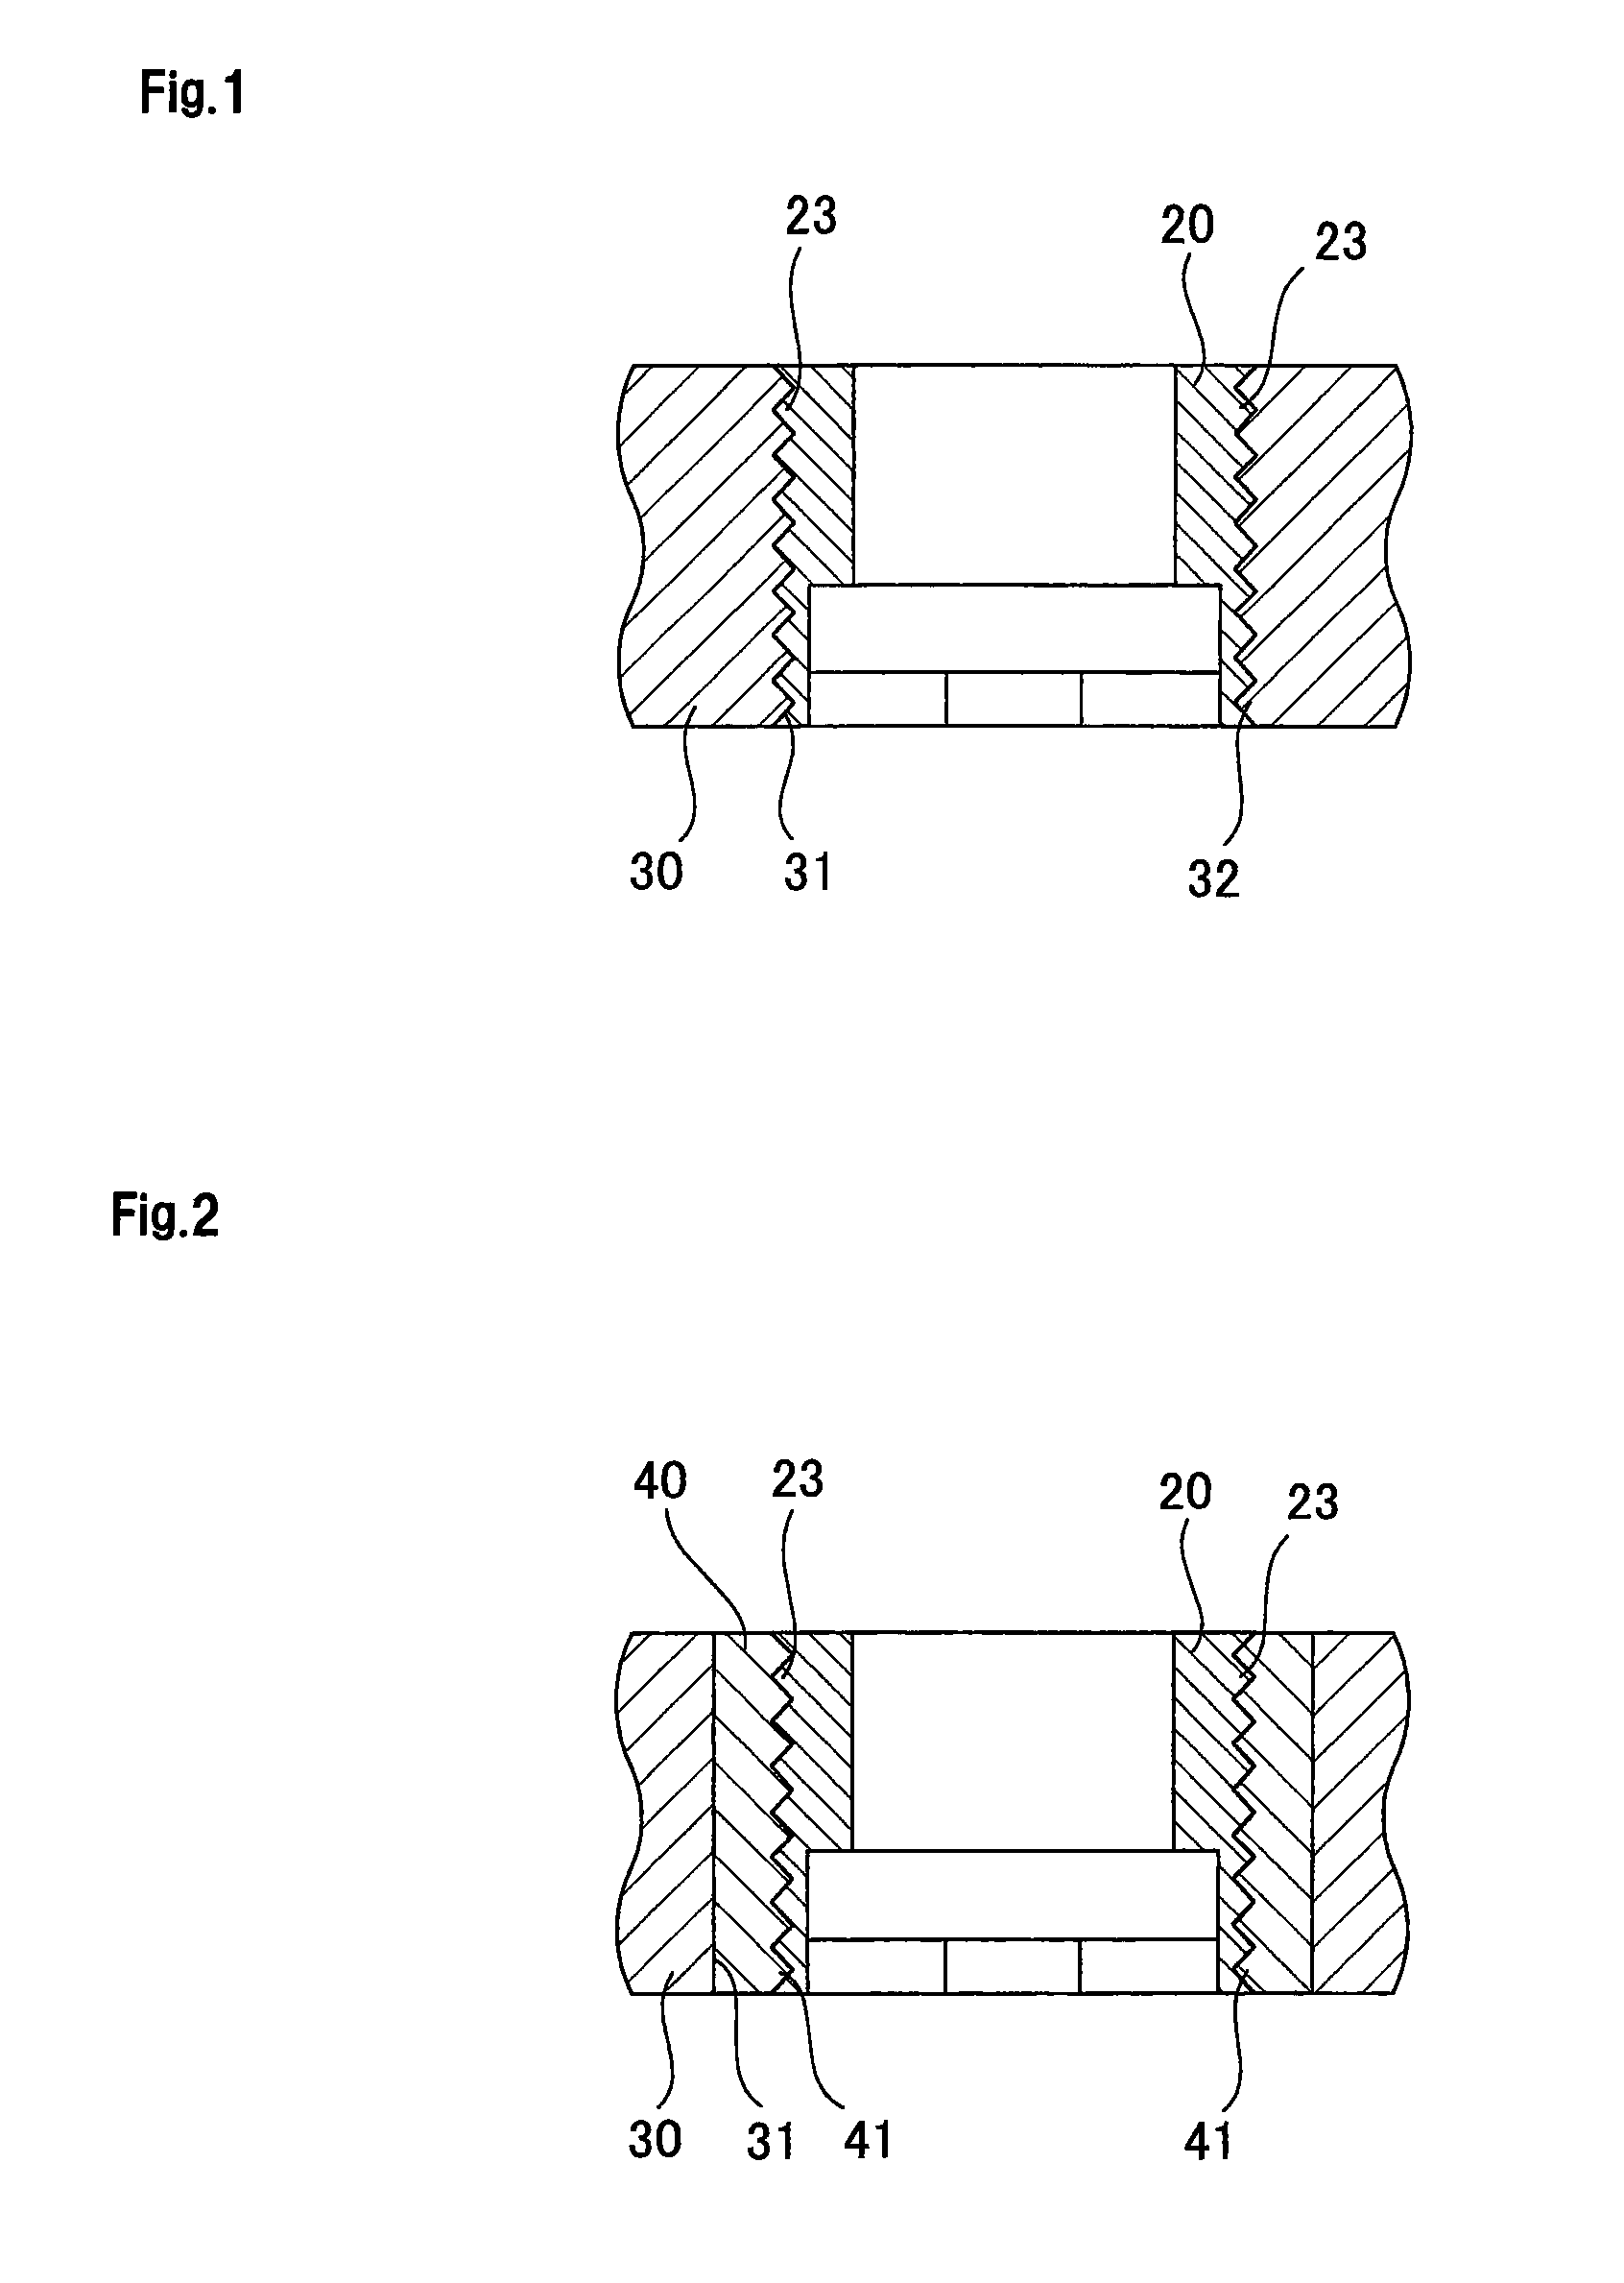 Coupling structure of fuel assembly